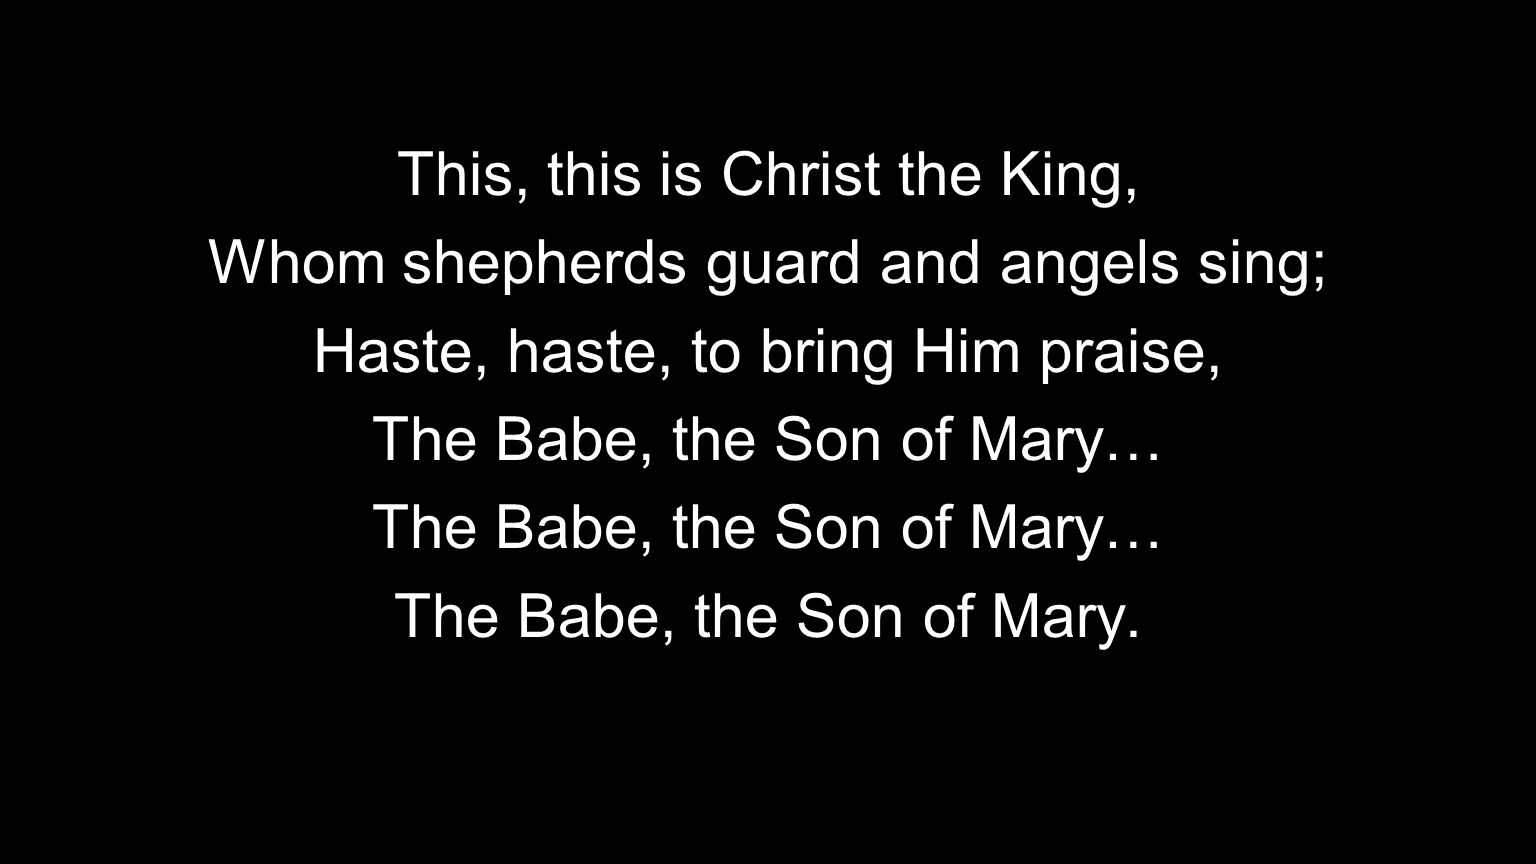 This, this is Christ the King, Whom shepherds guard and angels sing; Haste, haste, to bring Him praise, The Babe, the Son of Mary… The Babe, the Son of Mary.